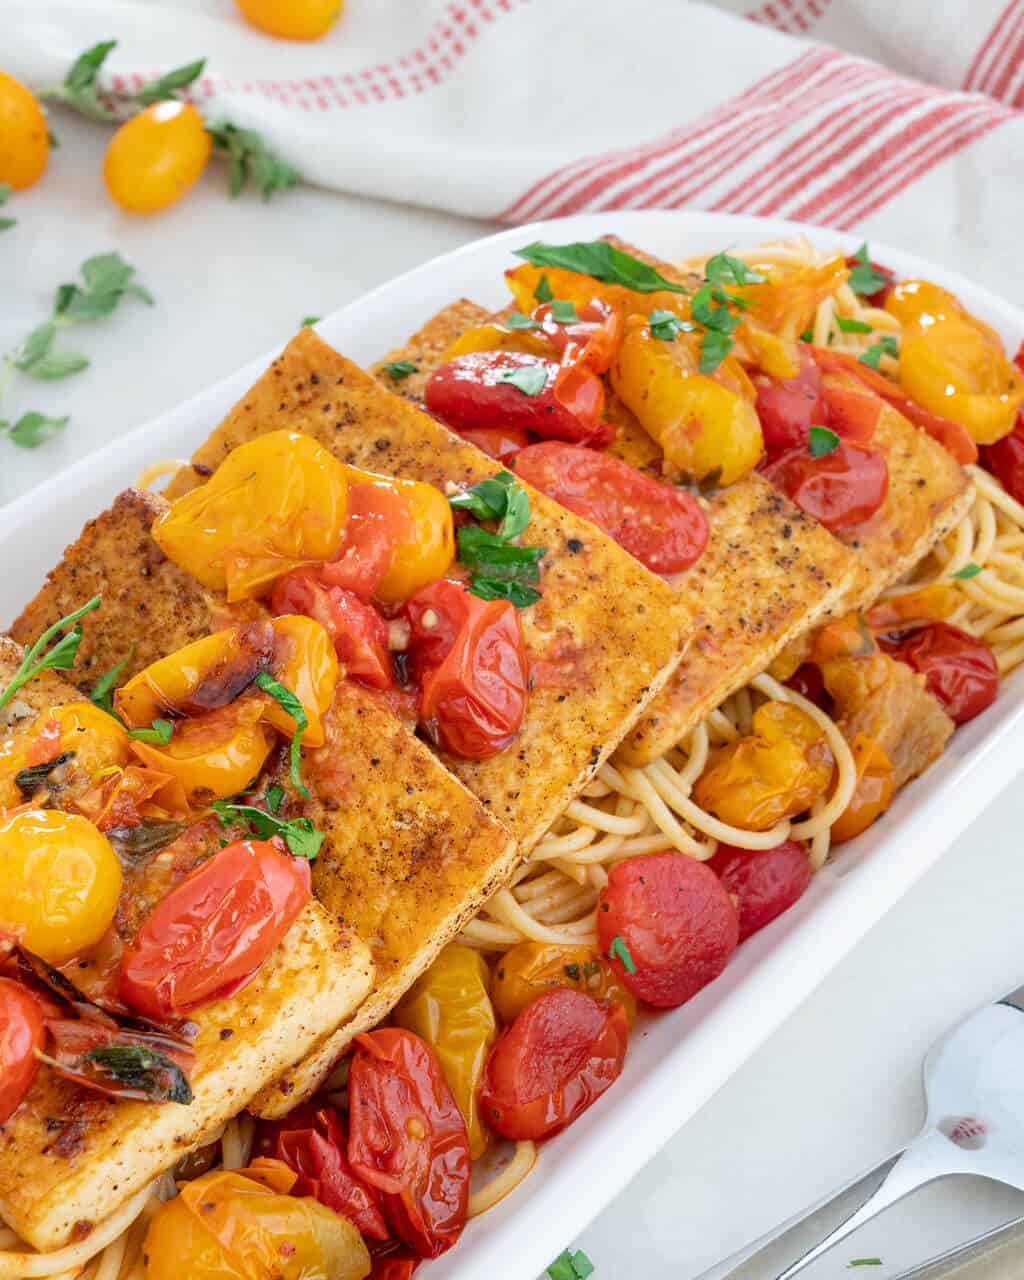 Tofu filets over a bed of tomatoes and pasta.